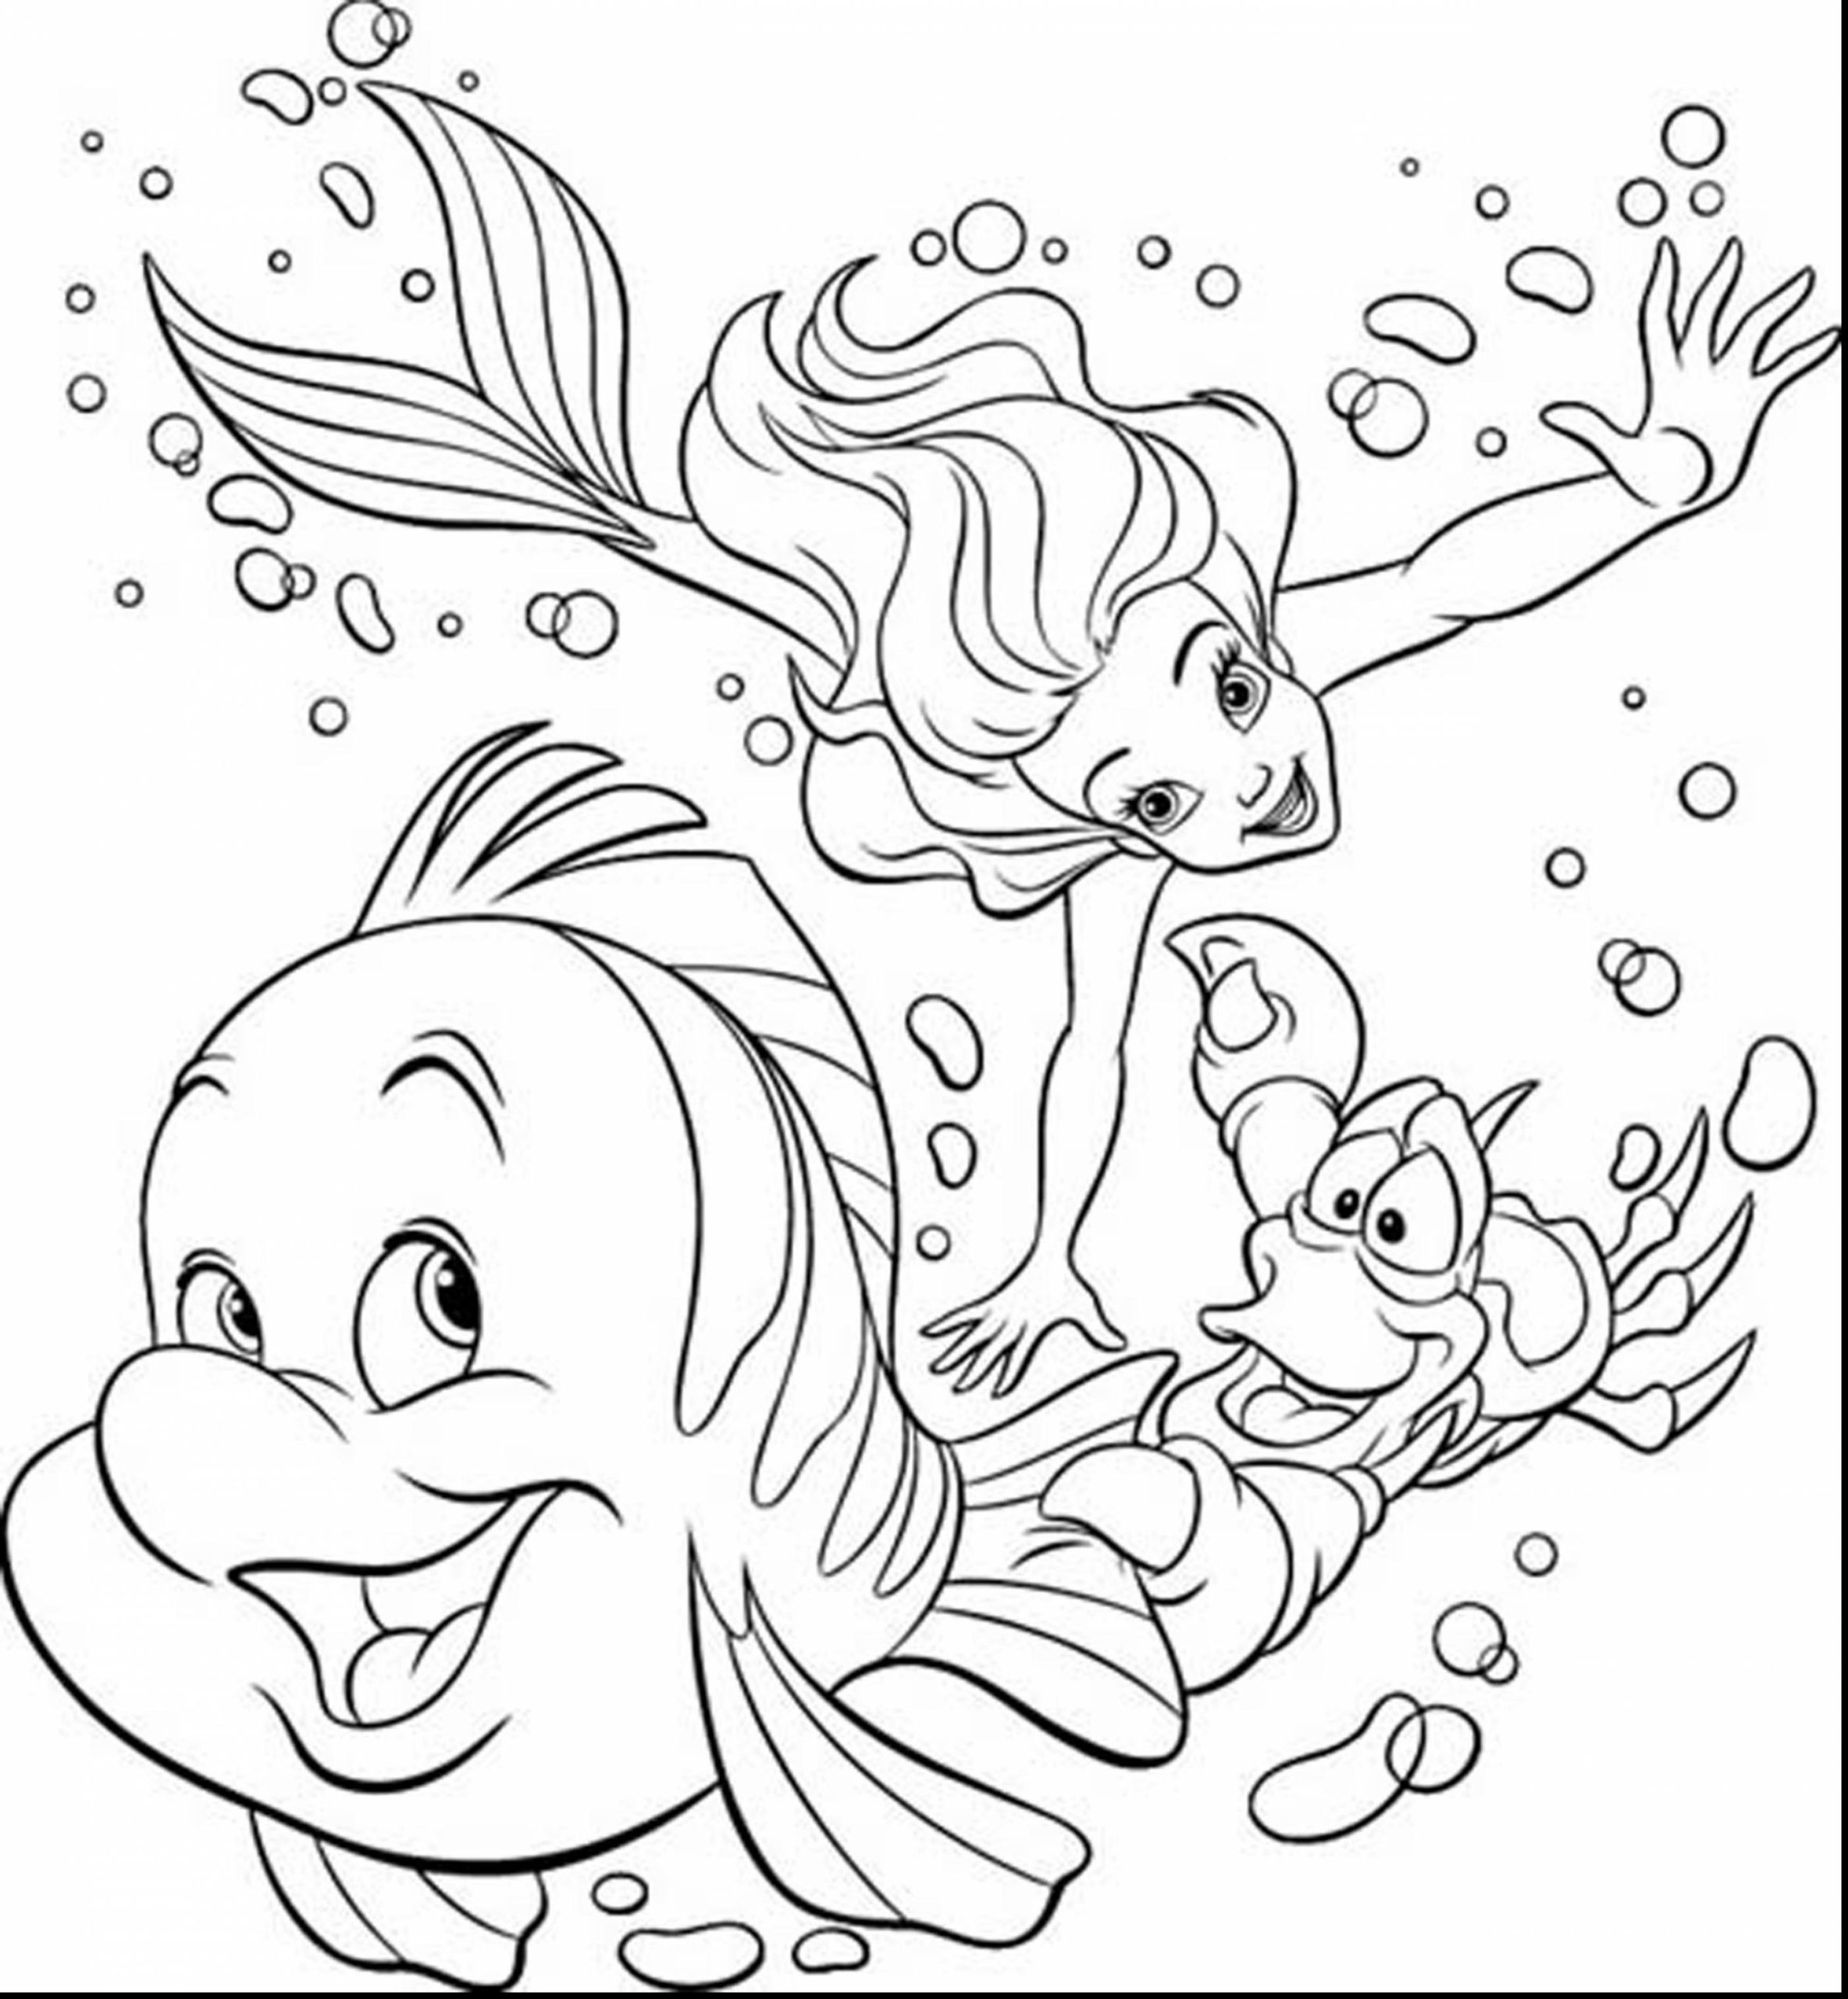 coloring pictures to copy Coloring pages sheep